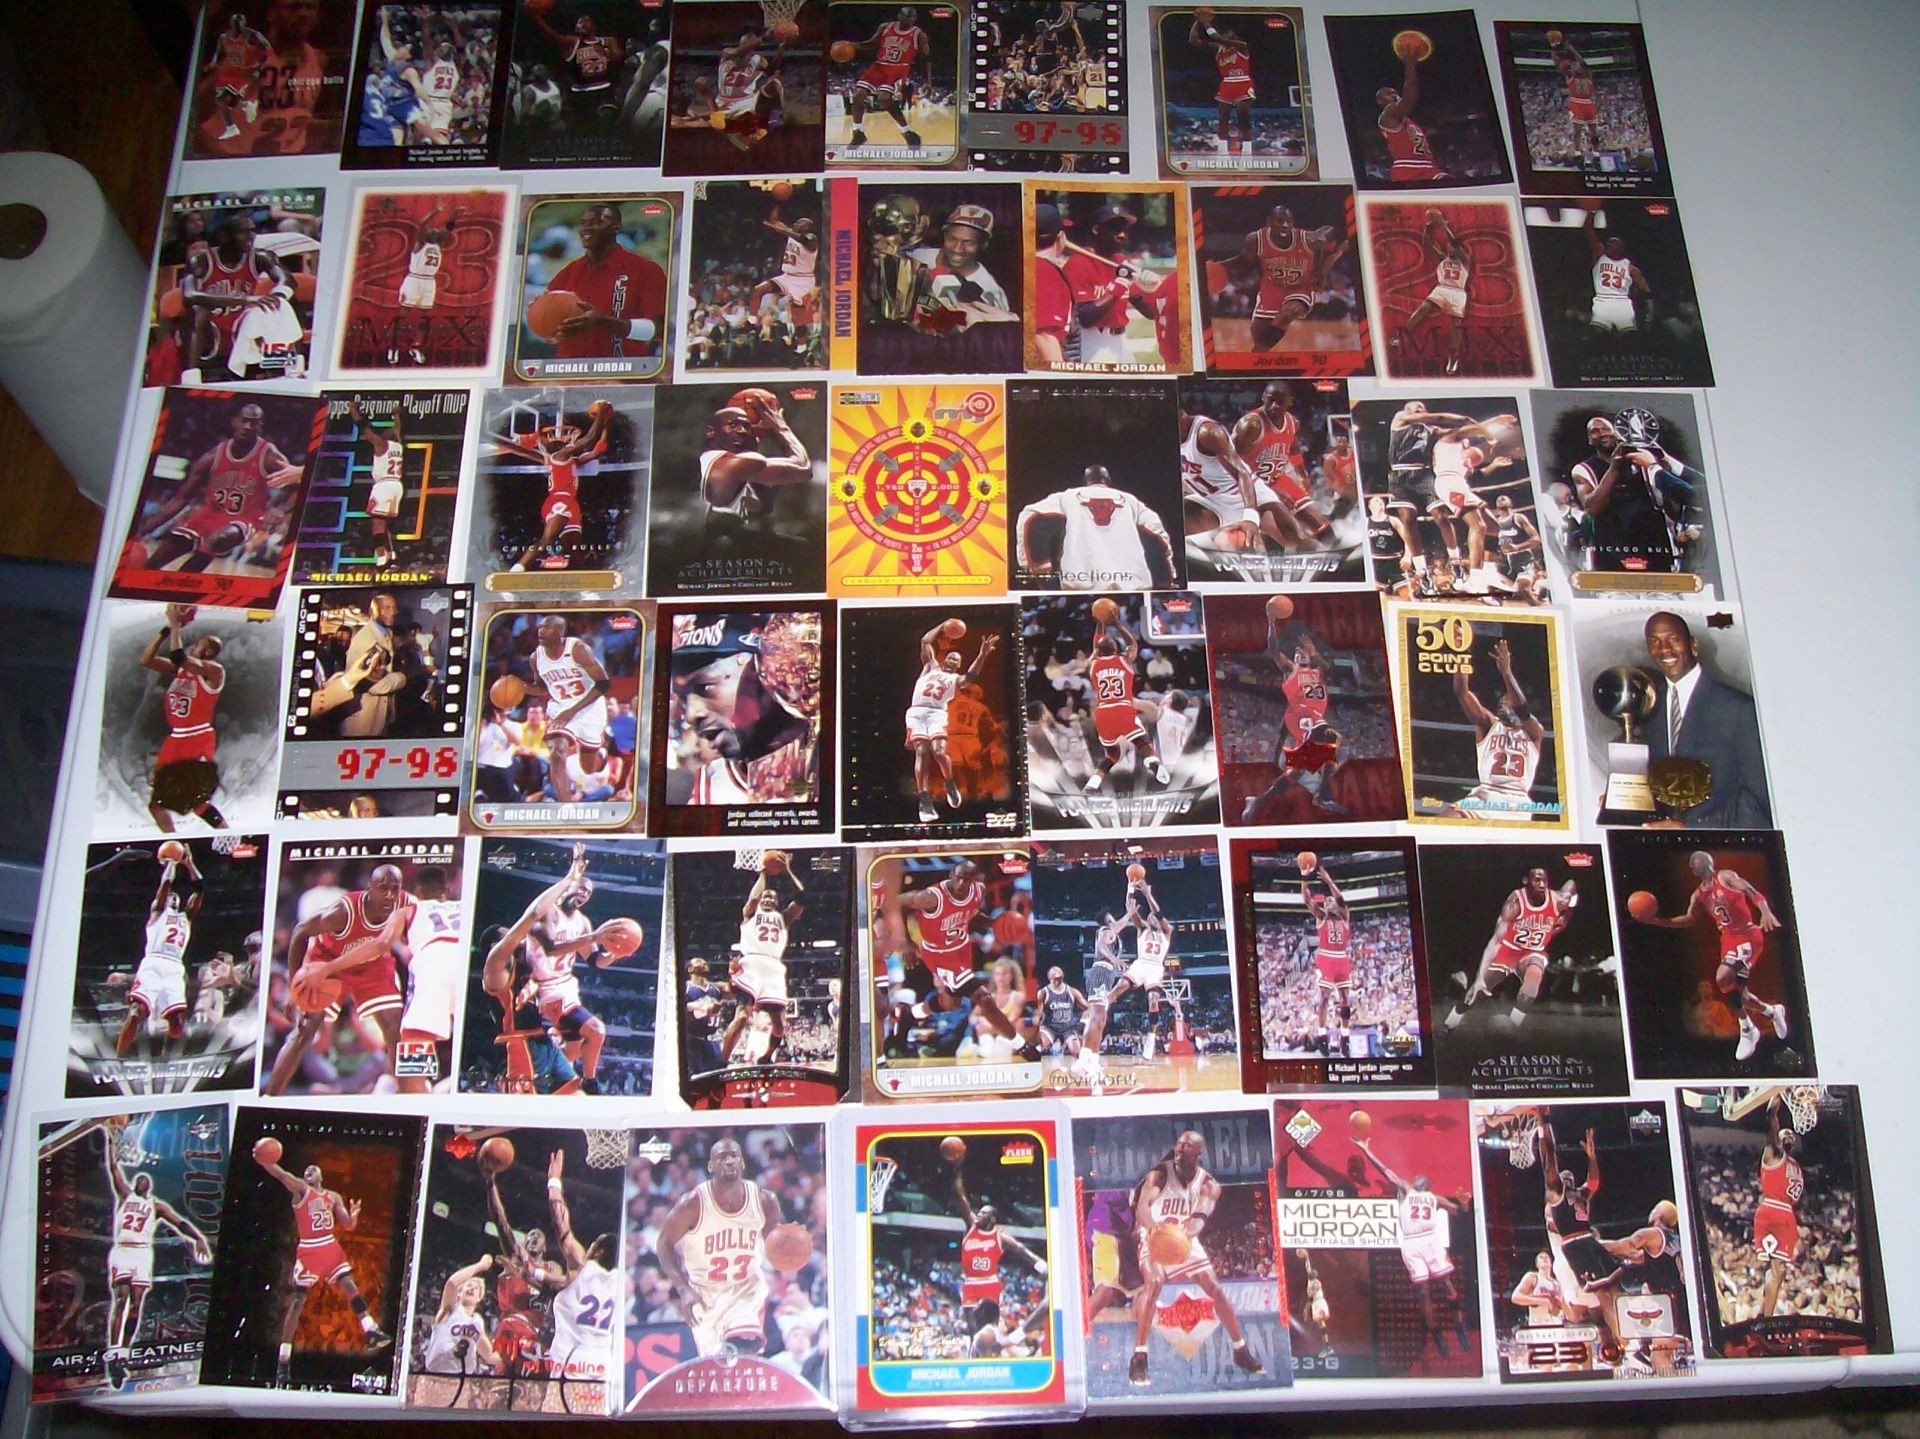 michaell jordan lot of 114 cards all different $90 with inserts rares great lot of jordans